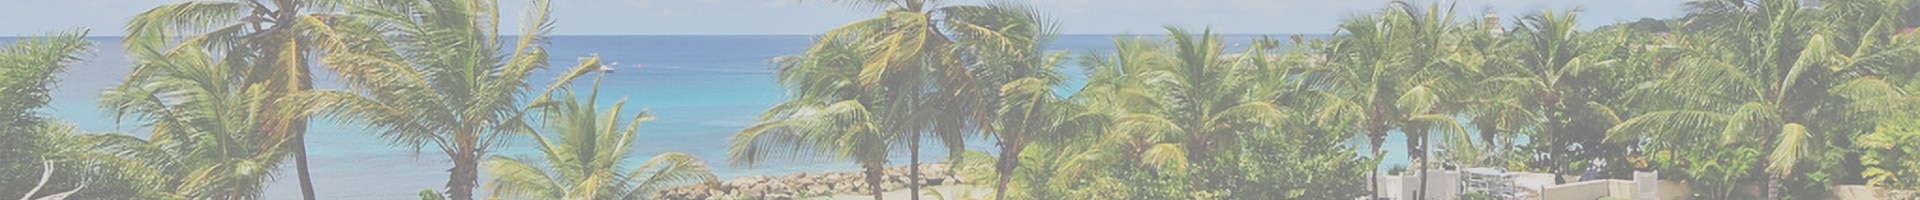 Image of palm trees and the sea on the Caribbean coast